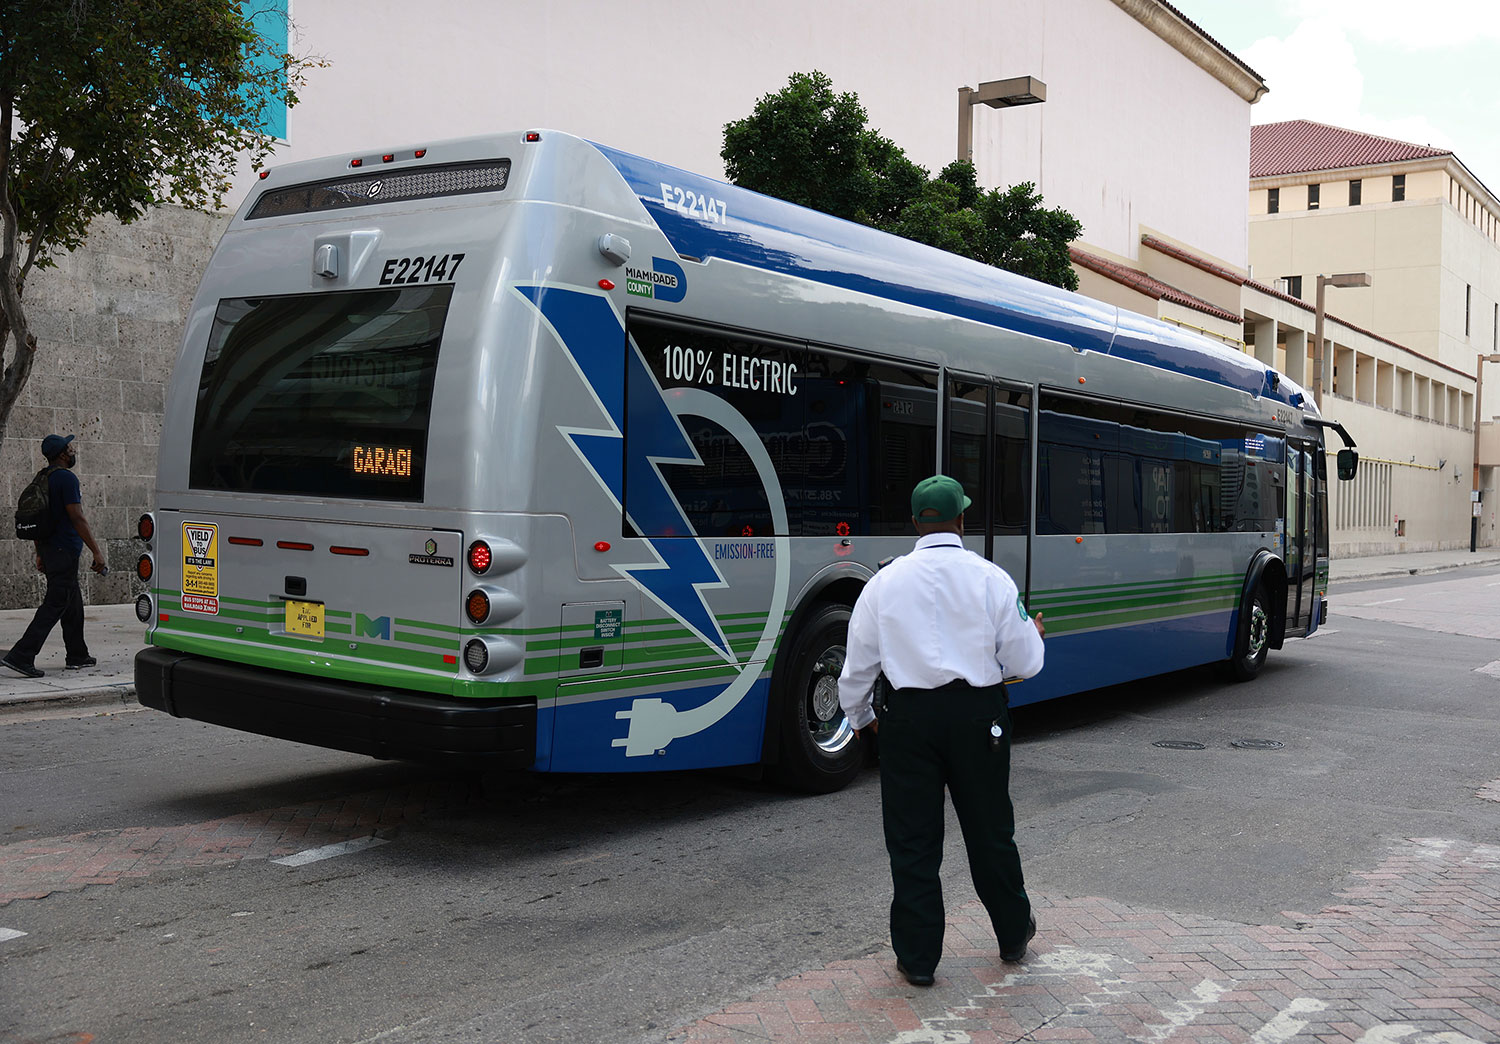 MIAMI, FL - FEBRUARY 2: A 40-foot battery-powered electric bus drives down a street in Miami, Florida on February 2, 2023. Miami-Dade County announced today that the city's transit system has begun using 75 Proterra ZX5 battery electric buses. The new vehicles advance the county's climate action strategy by reducing emissions and delivering cost savings for both transit users and residents.  (Photo by Joe Radle/Getty Images)